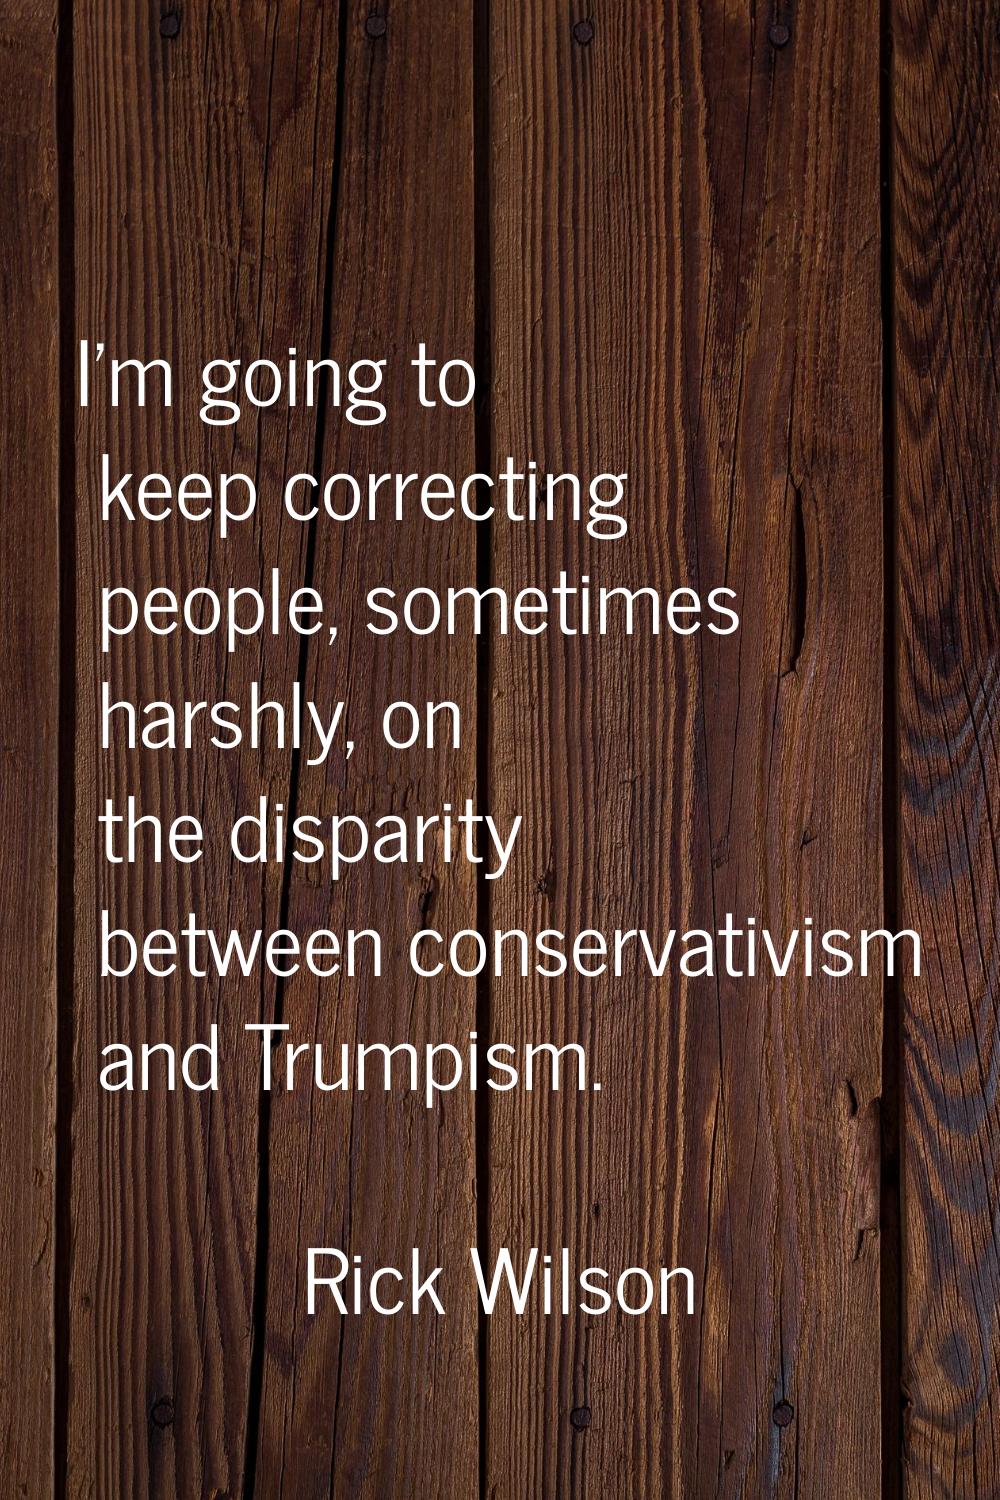 I'm going to keep correcting people, sometimes harshly, on the disparity between conservativism and